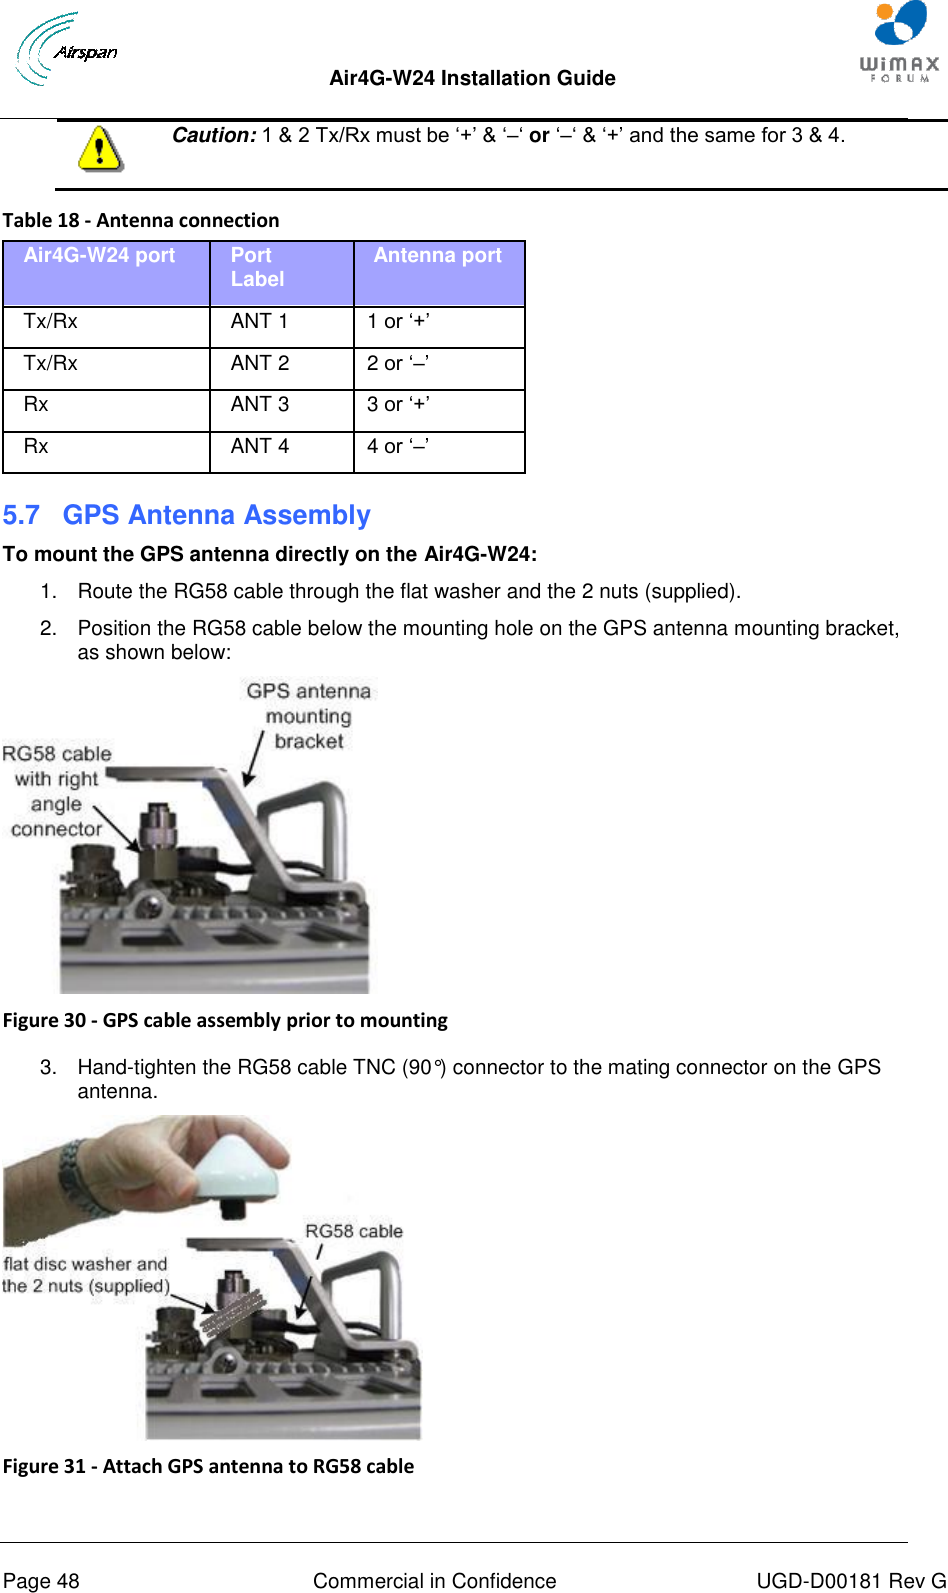  Air4G-W24 Installation Guide       Page 48  Commercial in Confidence  UGD-D00181 Rev G   Caution: 1 &amp; 2 Tx/Rx must be „+‟ &amp; „–„ or „–„ &amp; „+‟ and the same for 3 &amp; 4.  Table 18 - Antenna connection Air4G-W24 port Port  Label    Antenna port Tx/Rx ANT 1    1 or „+‟ Tx/Rx ANT 2    2 or „–‟ Rx ANT 3    3 or „+‟ Rx ANT 4    4 or „–‟ 5.7  GPS Antenna Assembly To mount the GPS antenna directly on the Air4G-W24: 1.  Route the RG58 cable through the flat washer and the 2 nuts (supplied). 2.  Position the RG58 cable below the mounting hole on the GPS antenna mounting bracket, as shown below:  Figure 30 - GPS cable assembly prior to mounting  3.  Hand-tighten the RG58 cable TNC (90°) connector to the mating connector on the GPS antenna.  Figure 31 - Attach GPS antenna to RG58 cable  